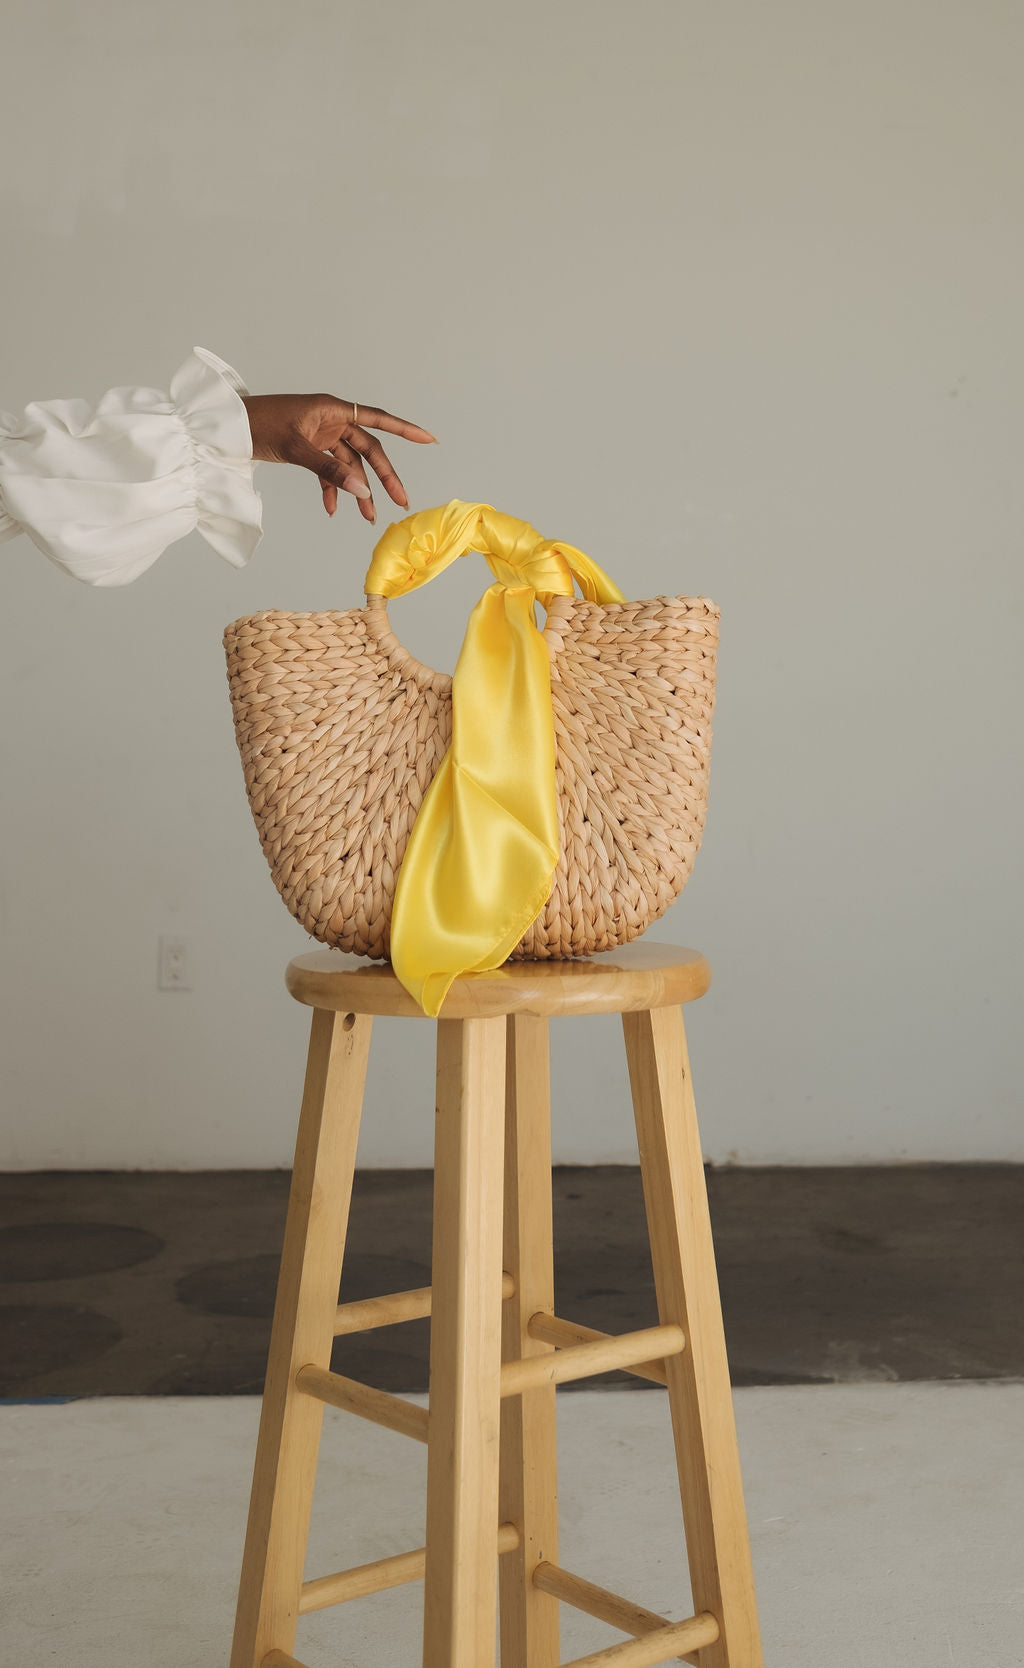 A tan wicker bag sits atop a stool. A woman's hand is reaching for the handle, which is wrapped in a bright yellow satin scarf.